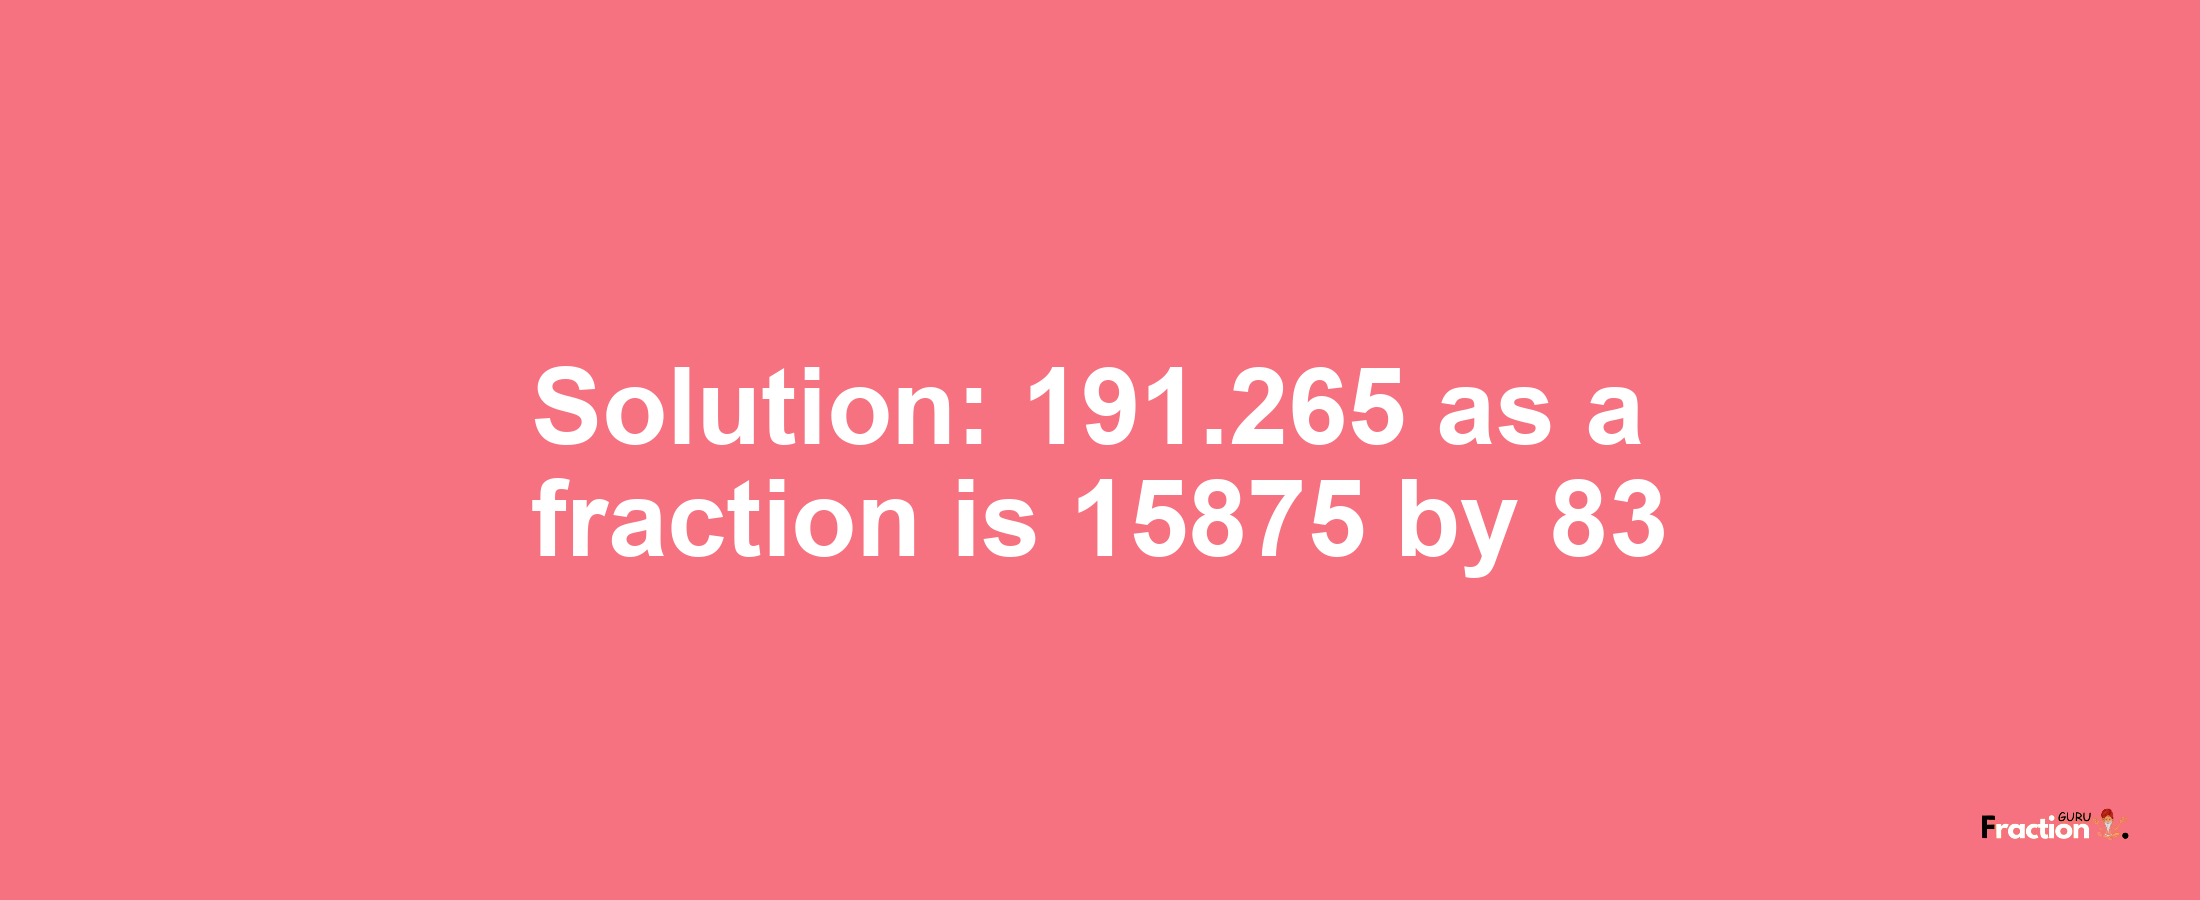 Solution:191.265 as a fraction is 15875/83